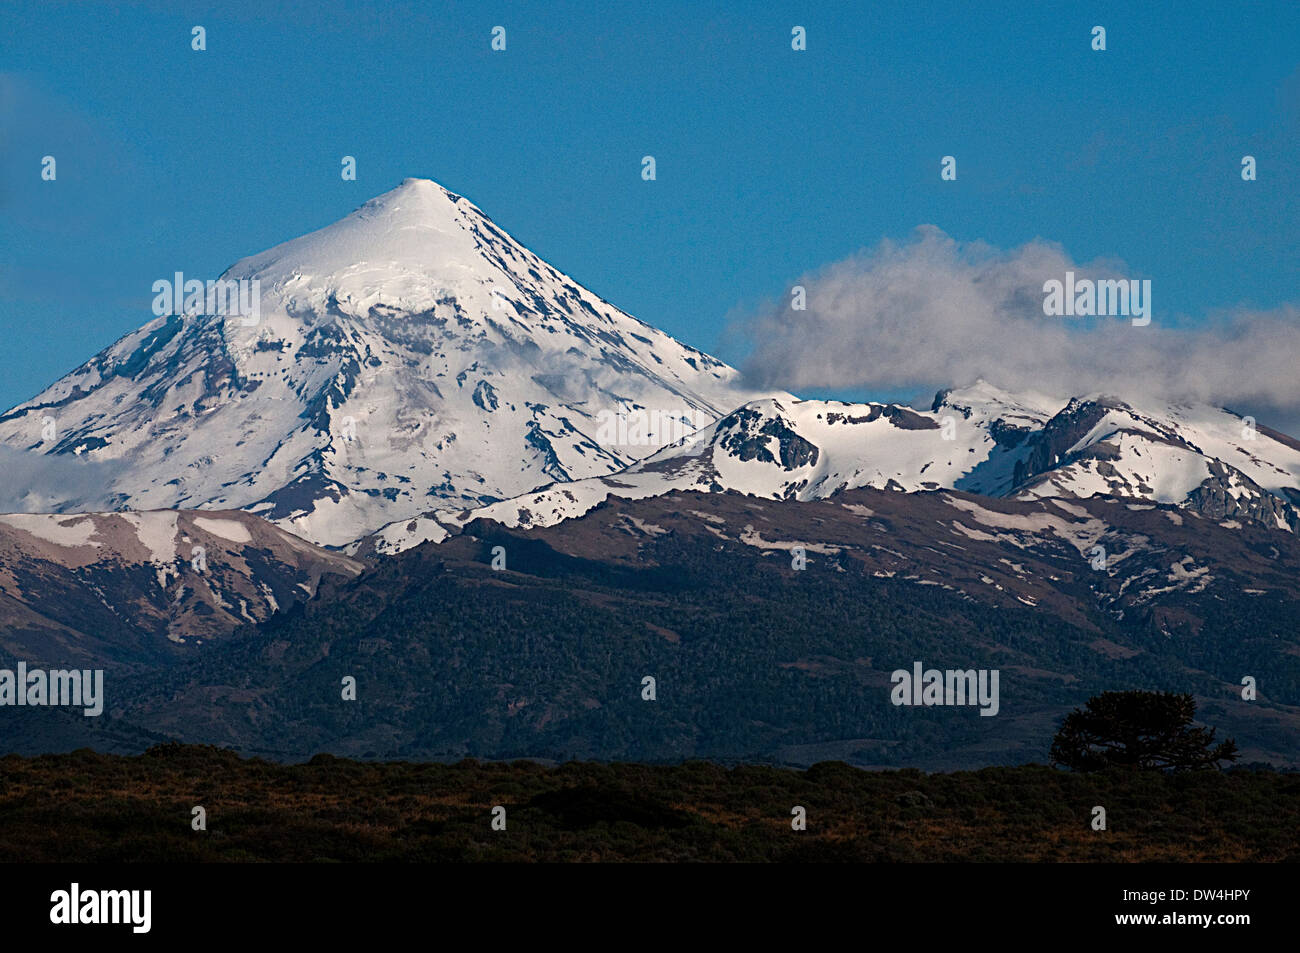 Lanín an ice-clad cone-shaped stratovolcano on the border of Argentina and Chile Stock Photo